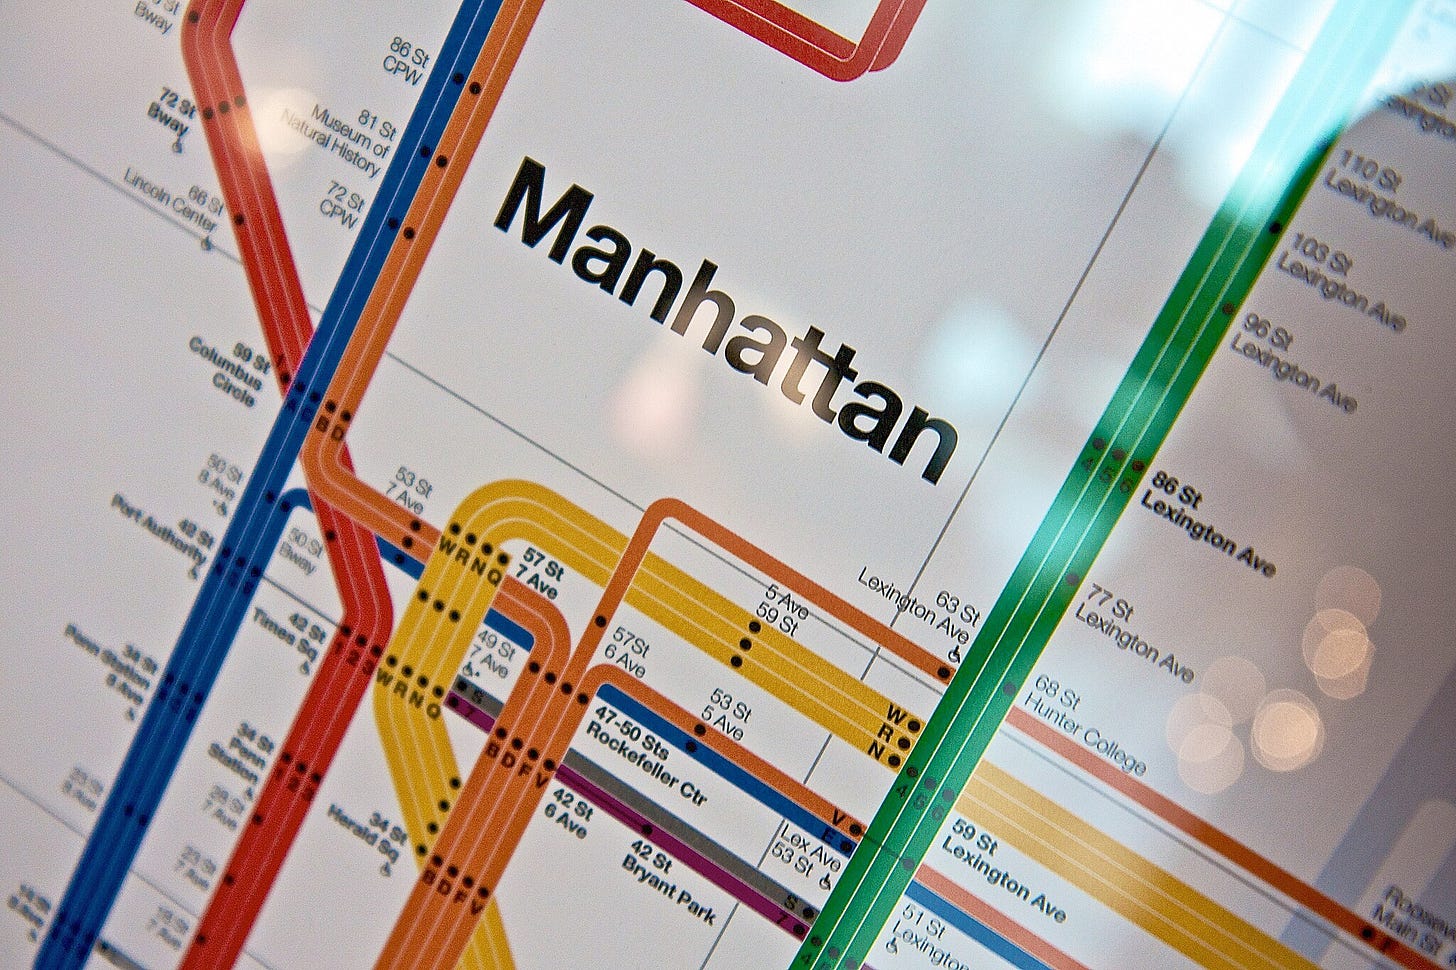 Close up of Vignelli's 2008 revision of the 1972 modernist New York City Subway map